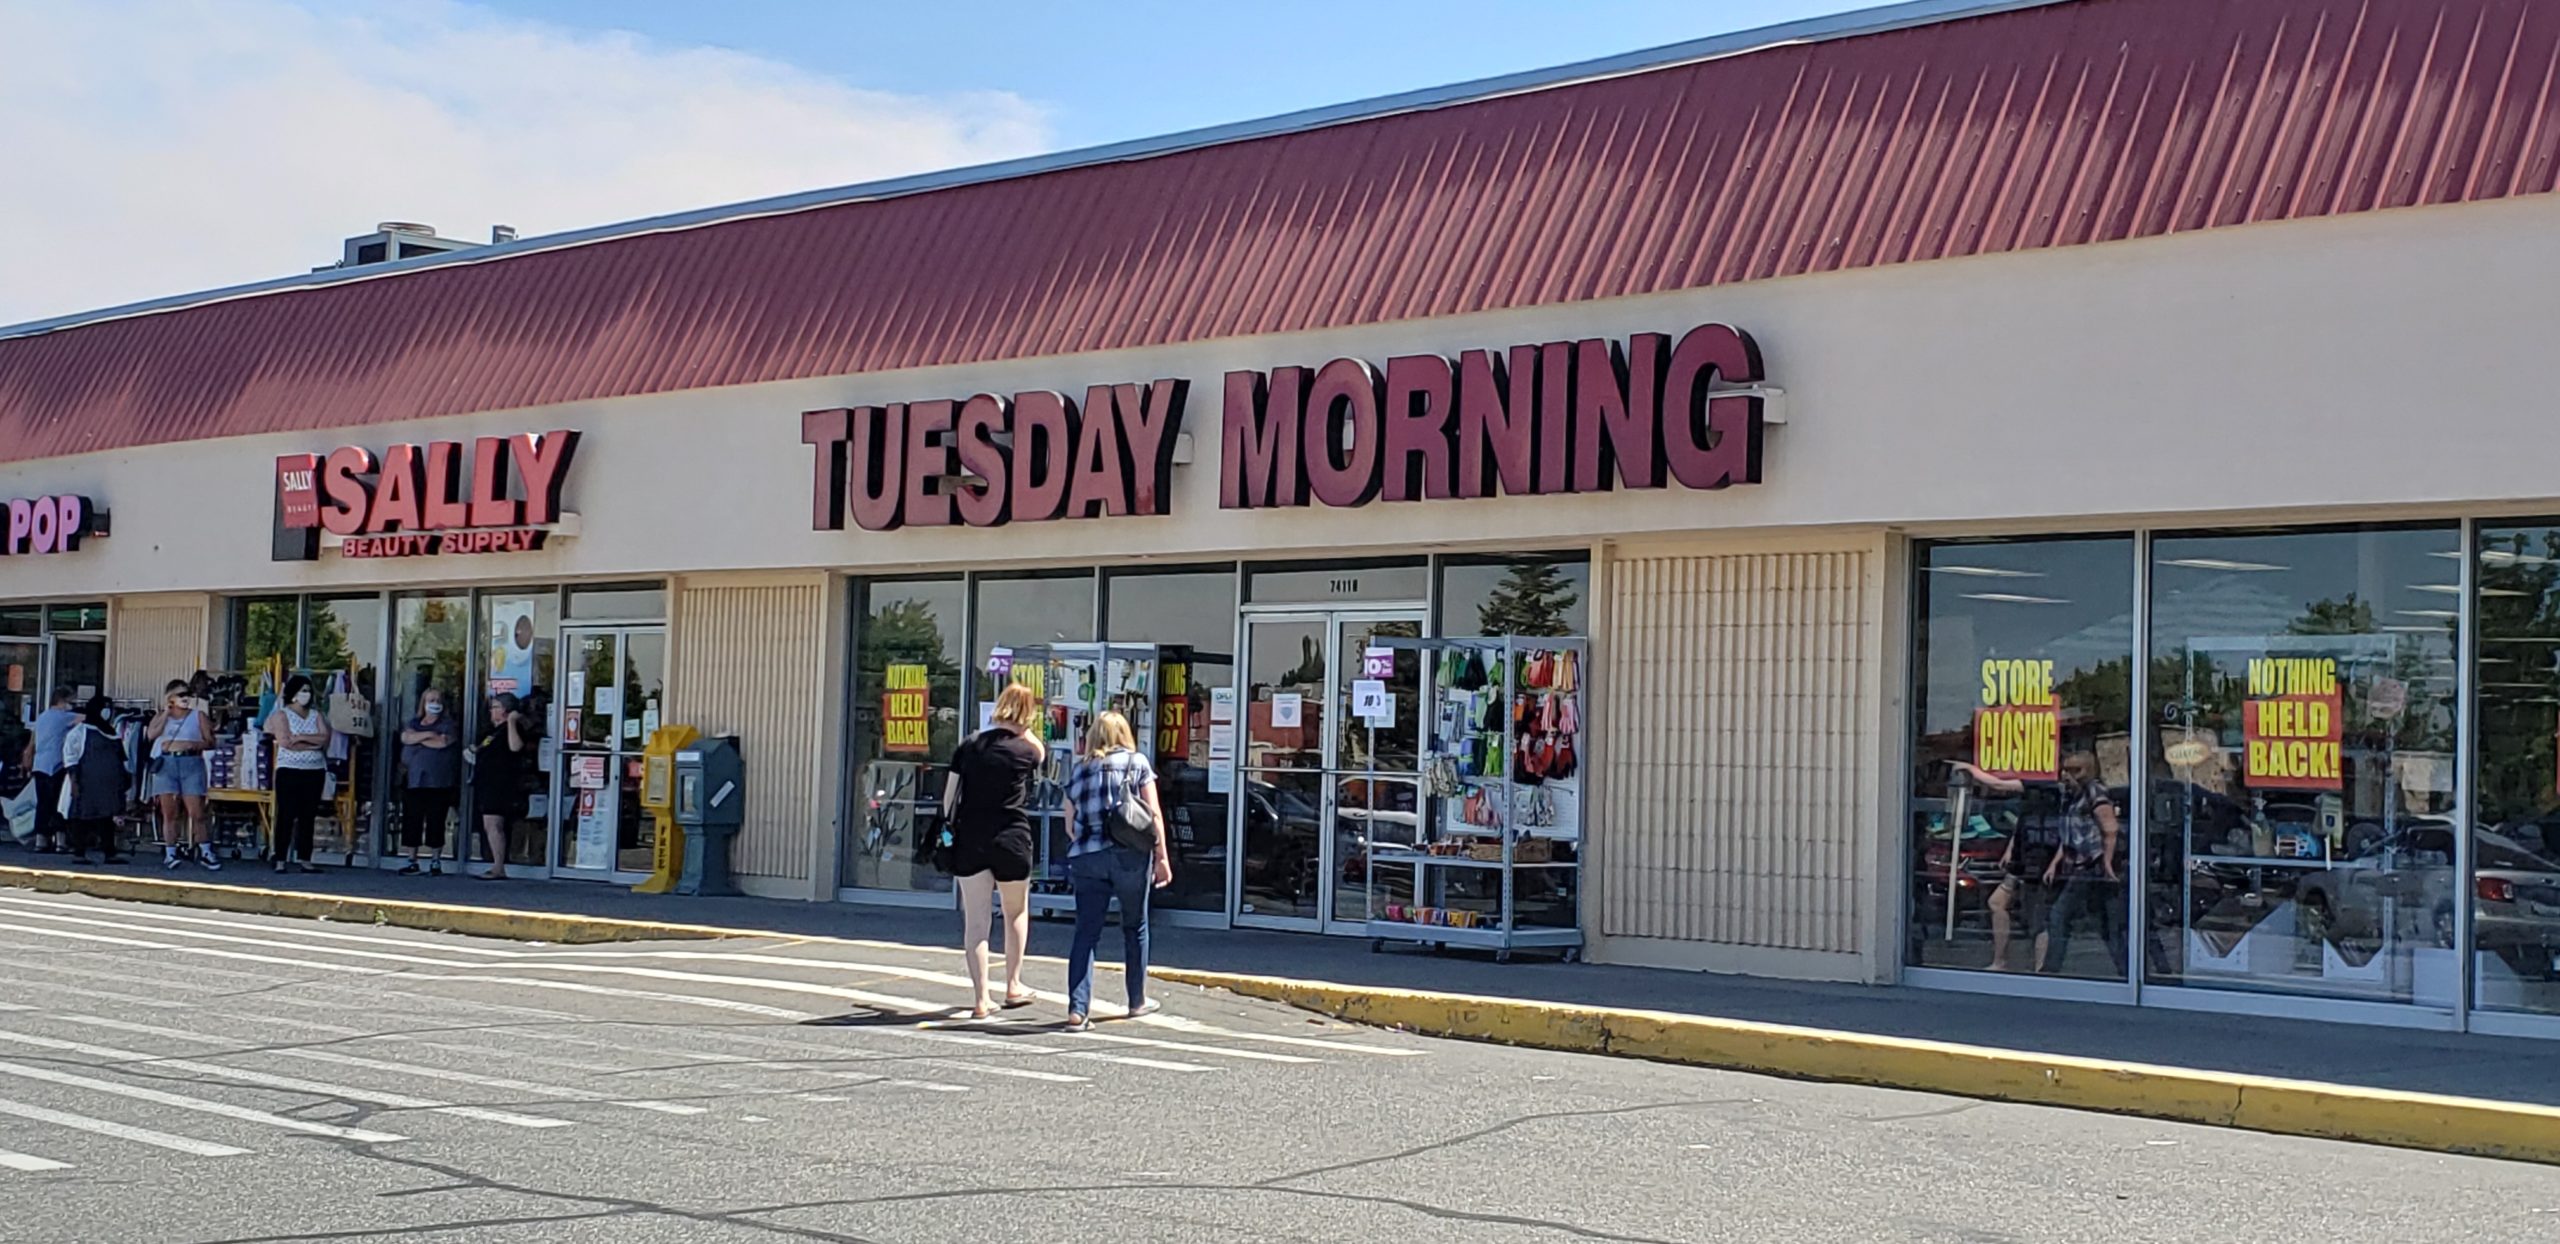 Home furnishings retailer Tuesday Morning will close its Kennewick store at 7411 W. Canal Drive after filing for protection from creditors under Chapter 11 of the U.S. Bankruptcy Code in May. The company cited  financial pressures of the Covid-19 pandemic. (TCAJOB photo) 
